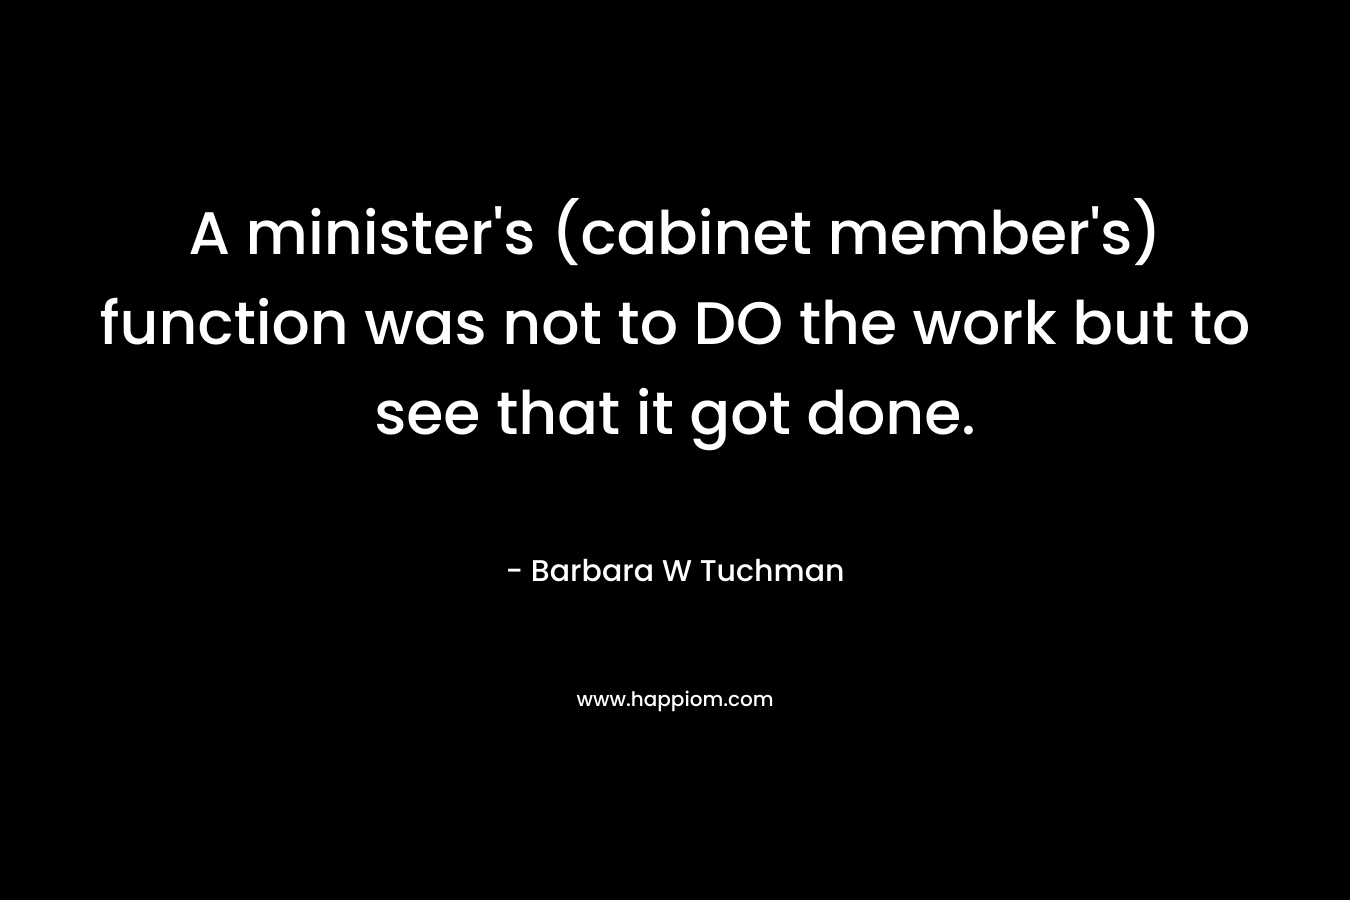 A minister’s (cabinet member’s) function was not to DO the work but to see that it got done. – Barbara W Tuchman